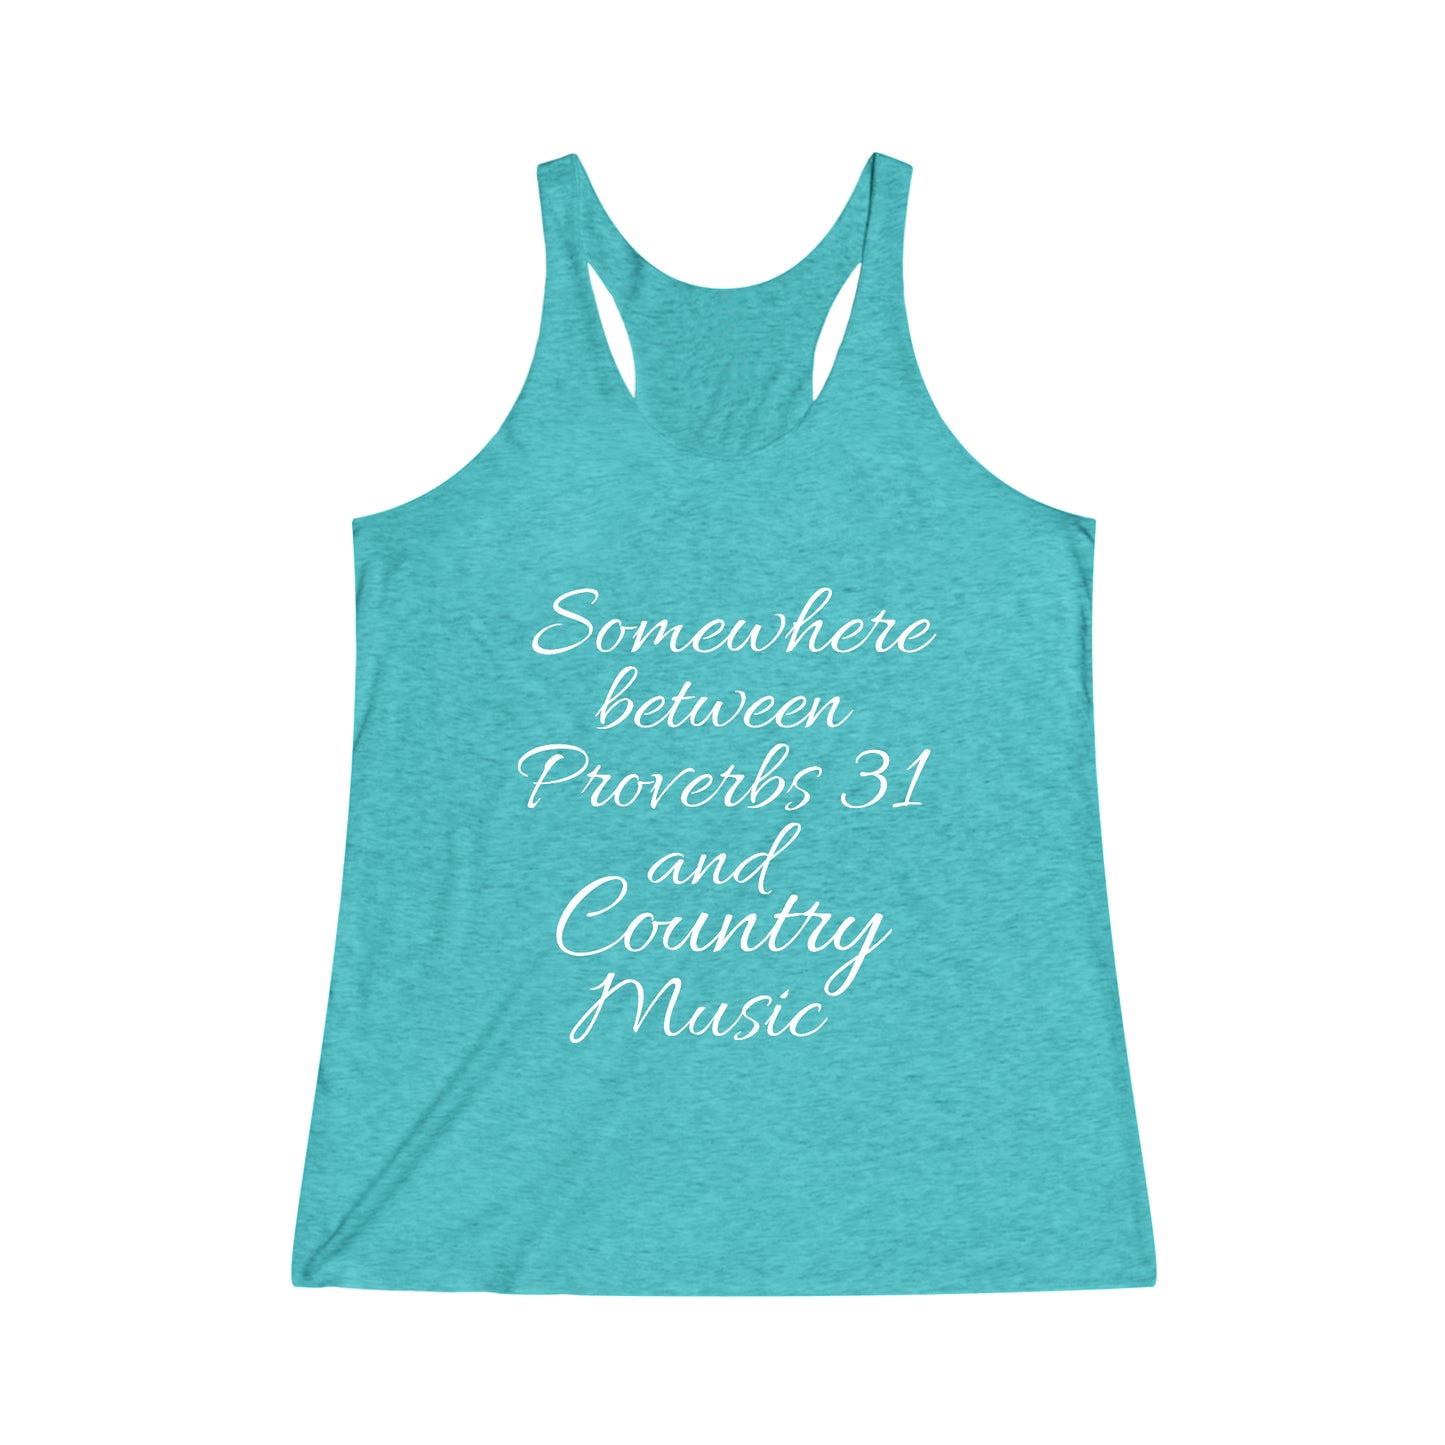 Somewhere Between Proverbs 31 and Country Music Women's Tri-Blend Racerback Tank